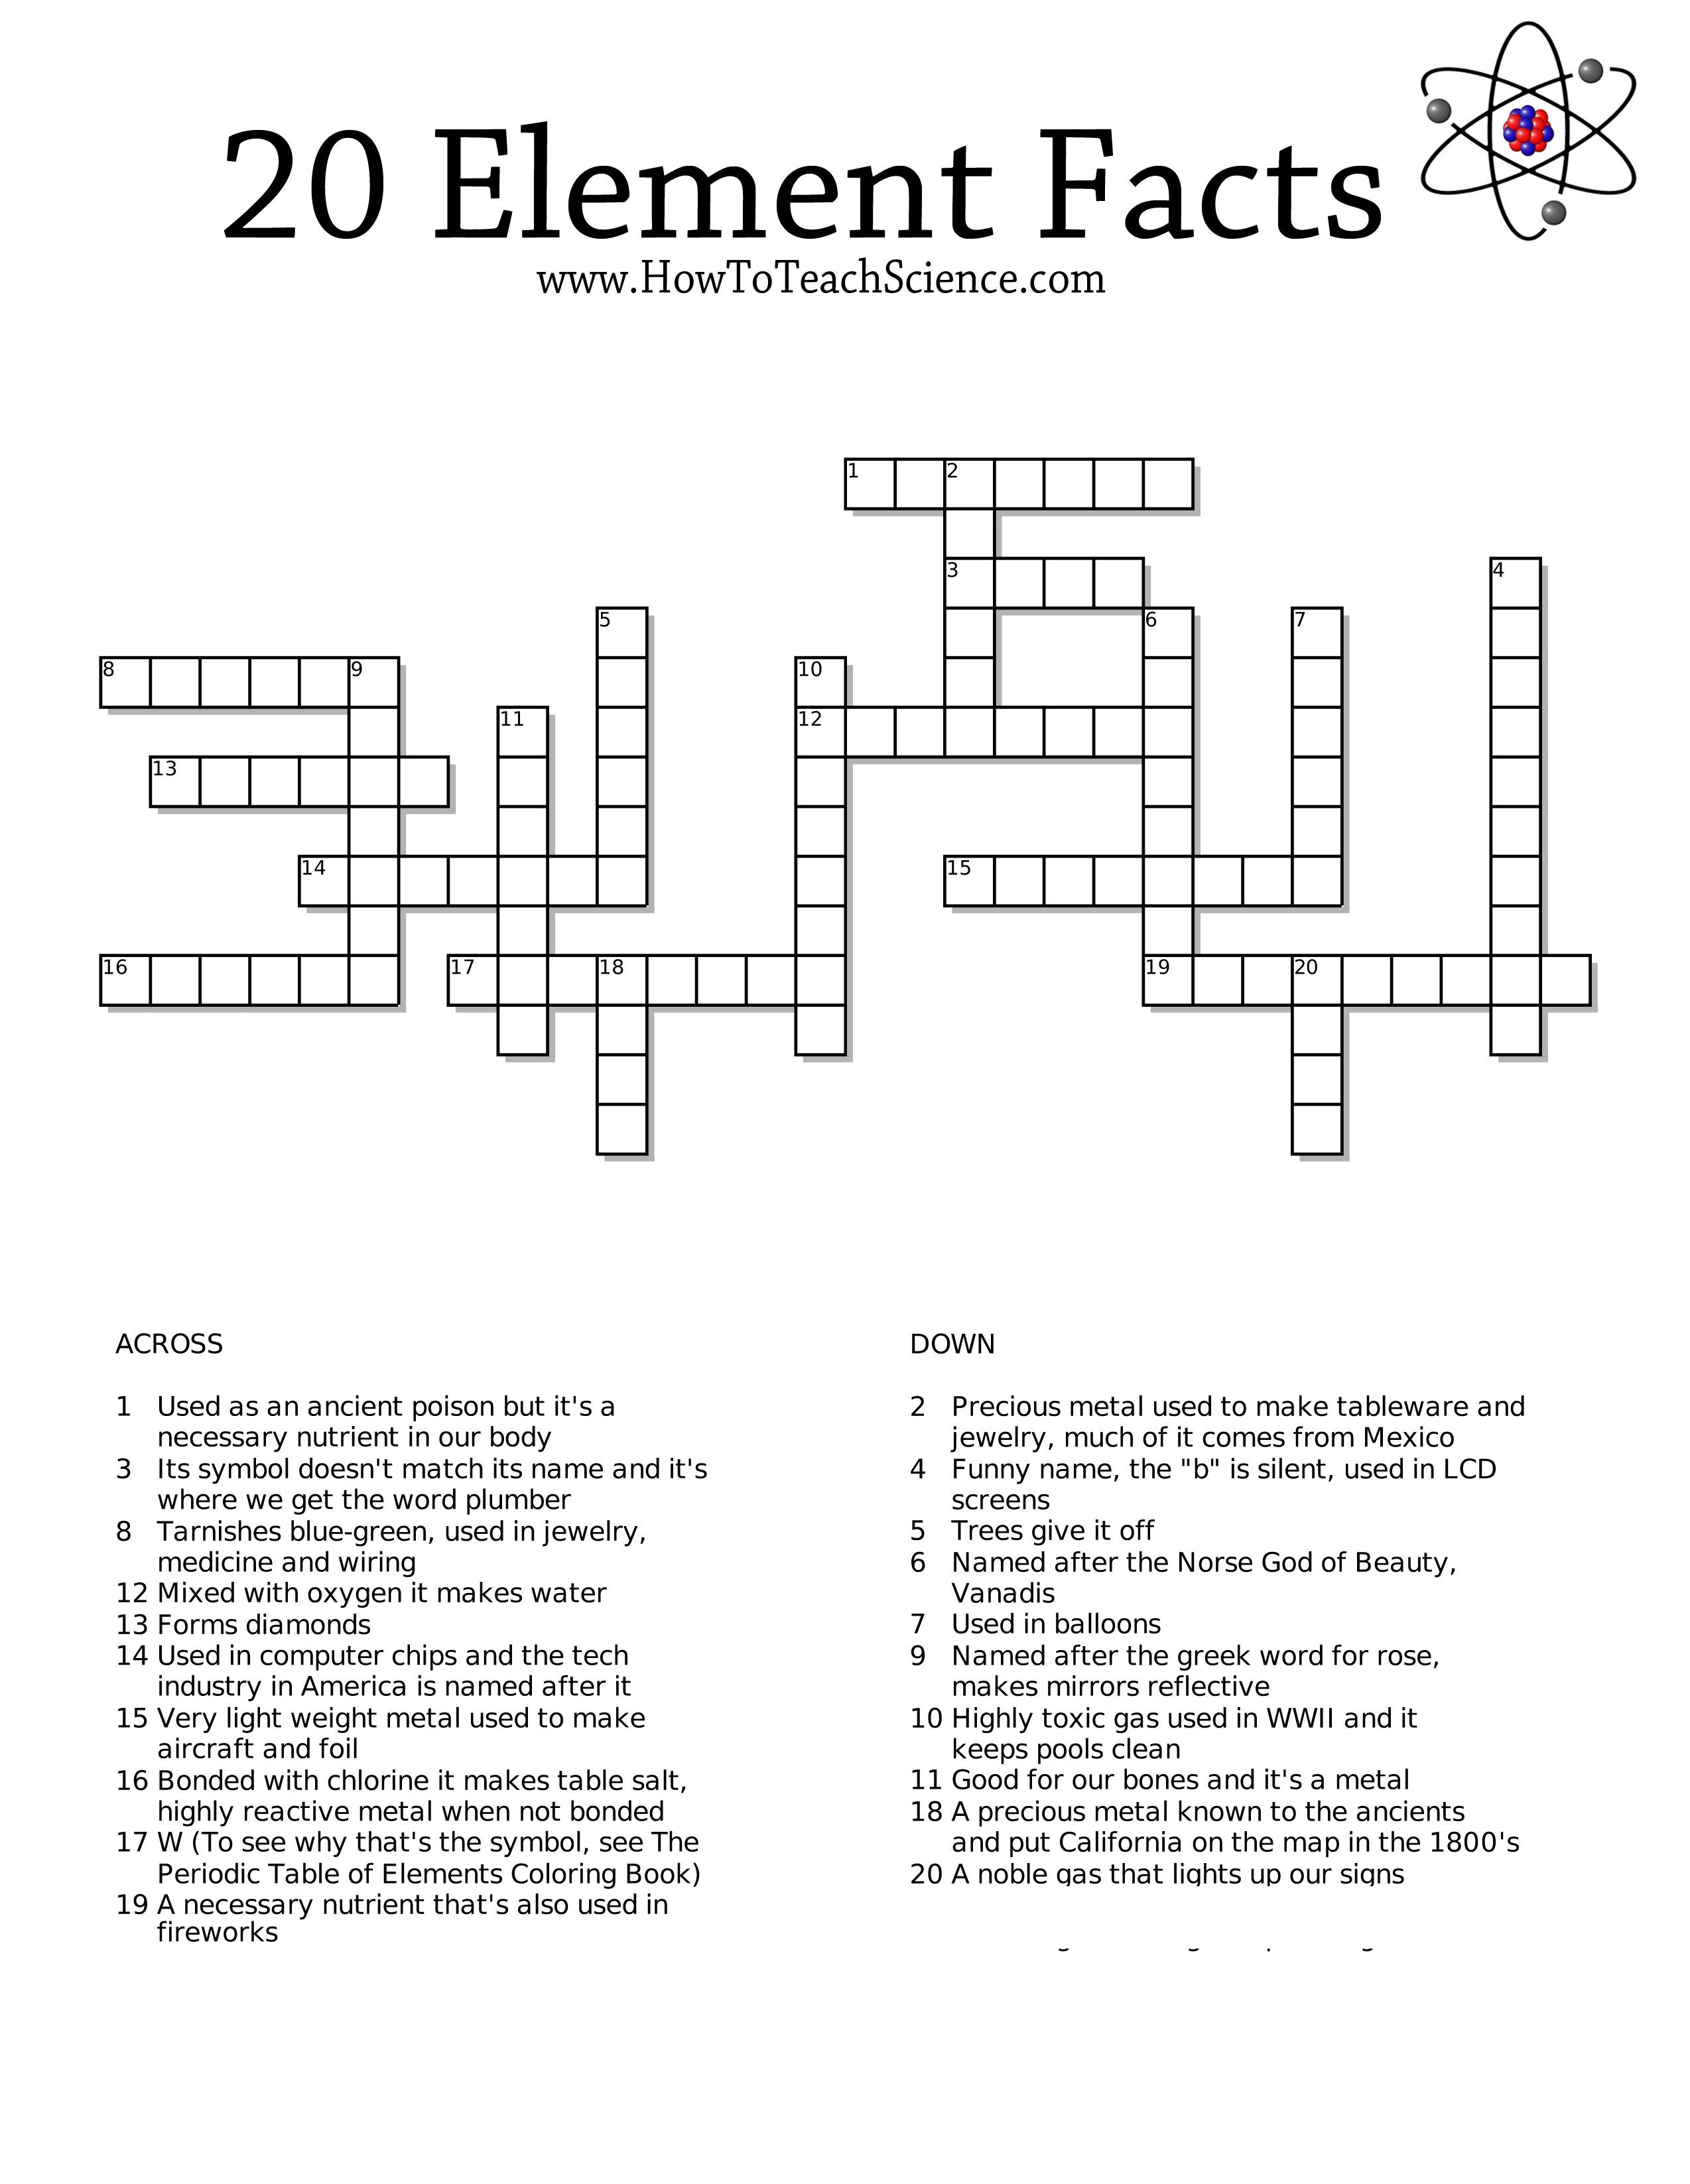 Free Crossword Printables On The Elements For 3Rd Grade Through High - Printable Crossword Puzzles 3Rd Grade